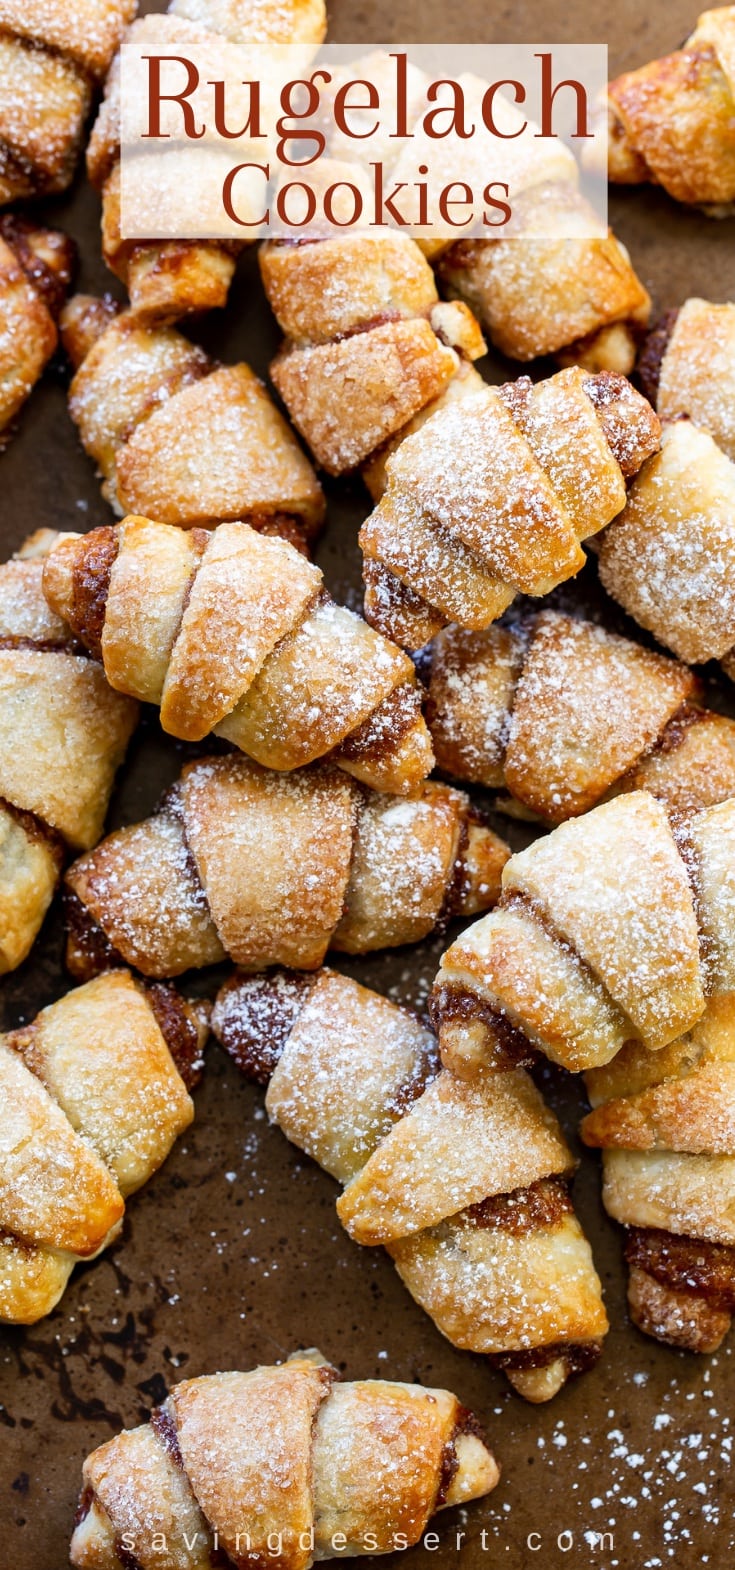 A cookie sheet with a stack of Rugelach cookies dusted with powdered sugar